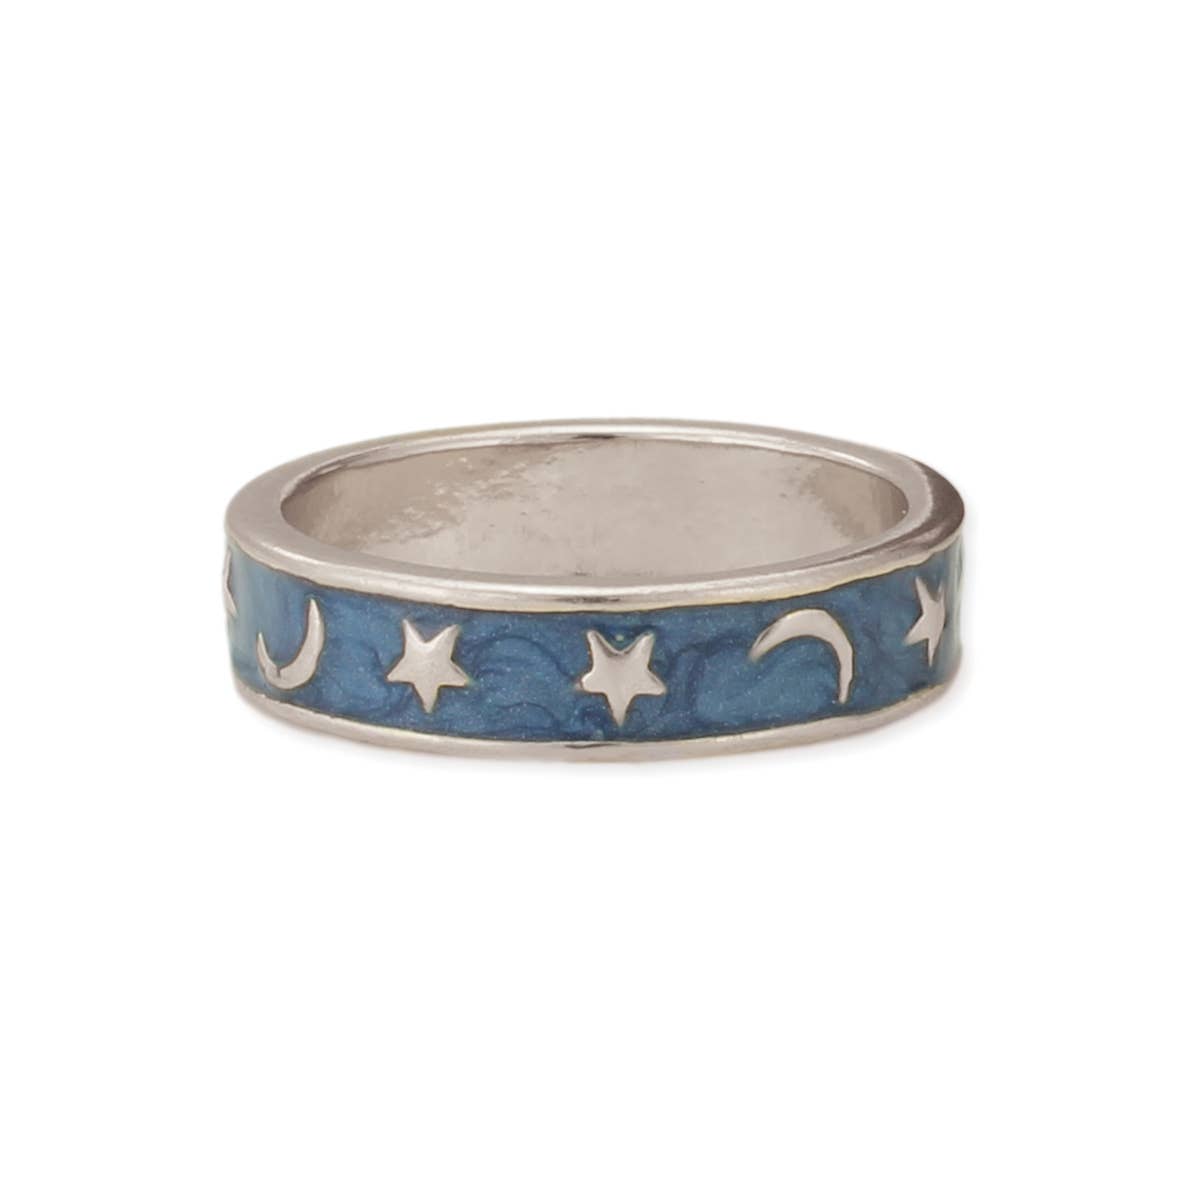 Vintage Blue Silver Celestial Band Ring